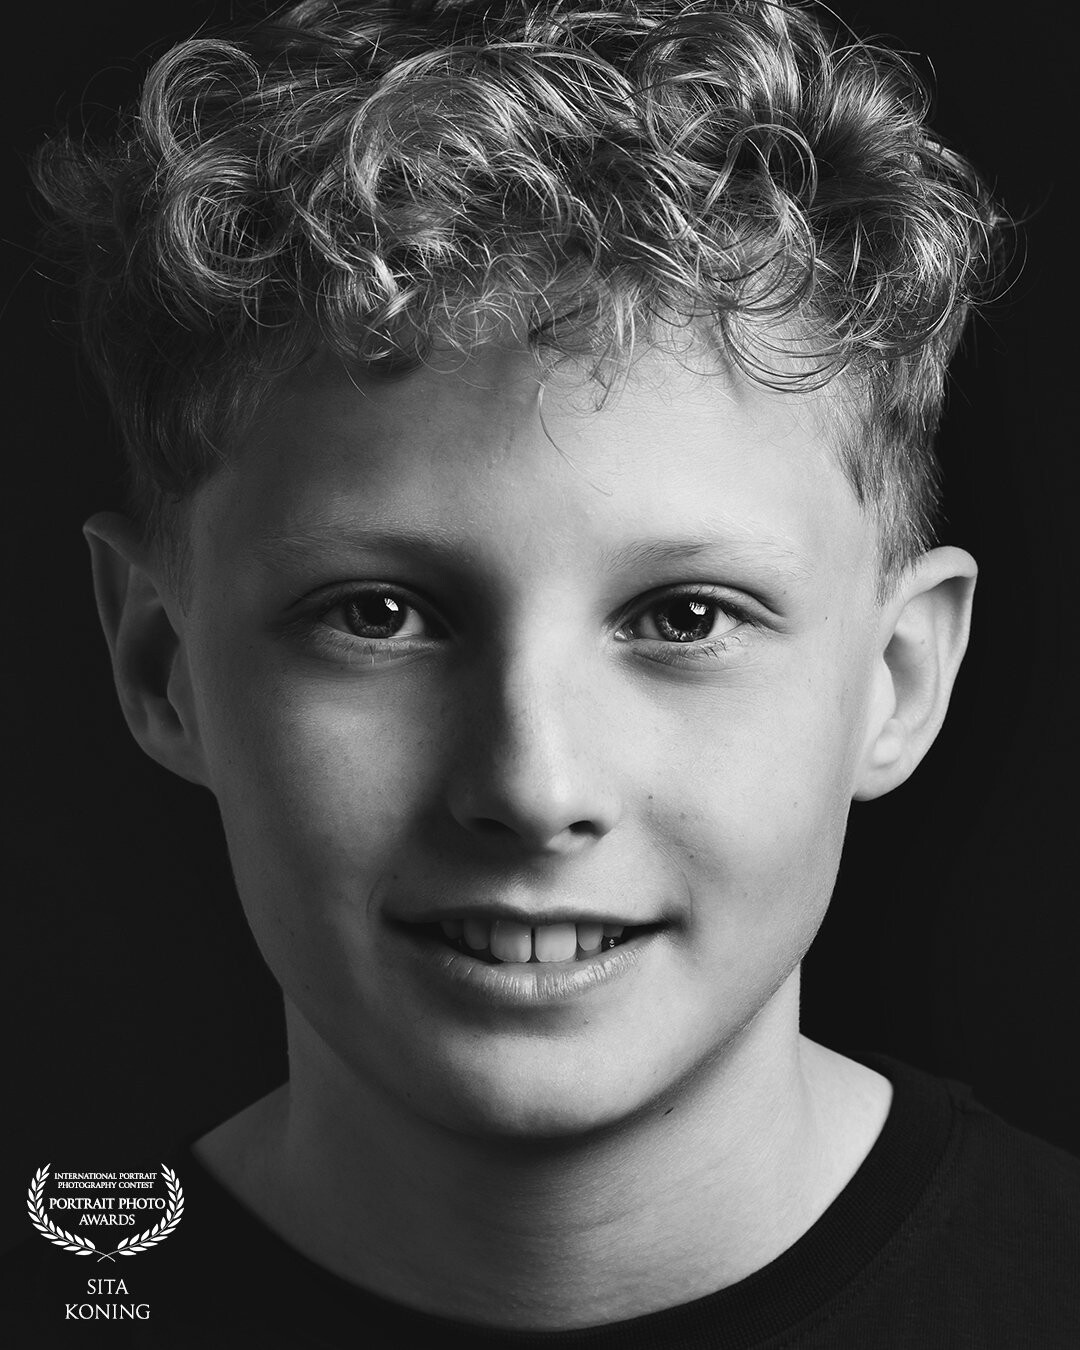 Just this happy face, strong portret of a young man. The curls and pretty eyes make this picture perfect I think. The combination with black and white version